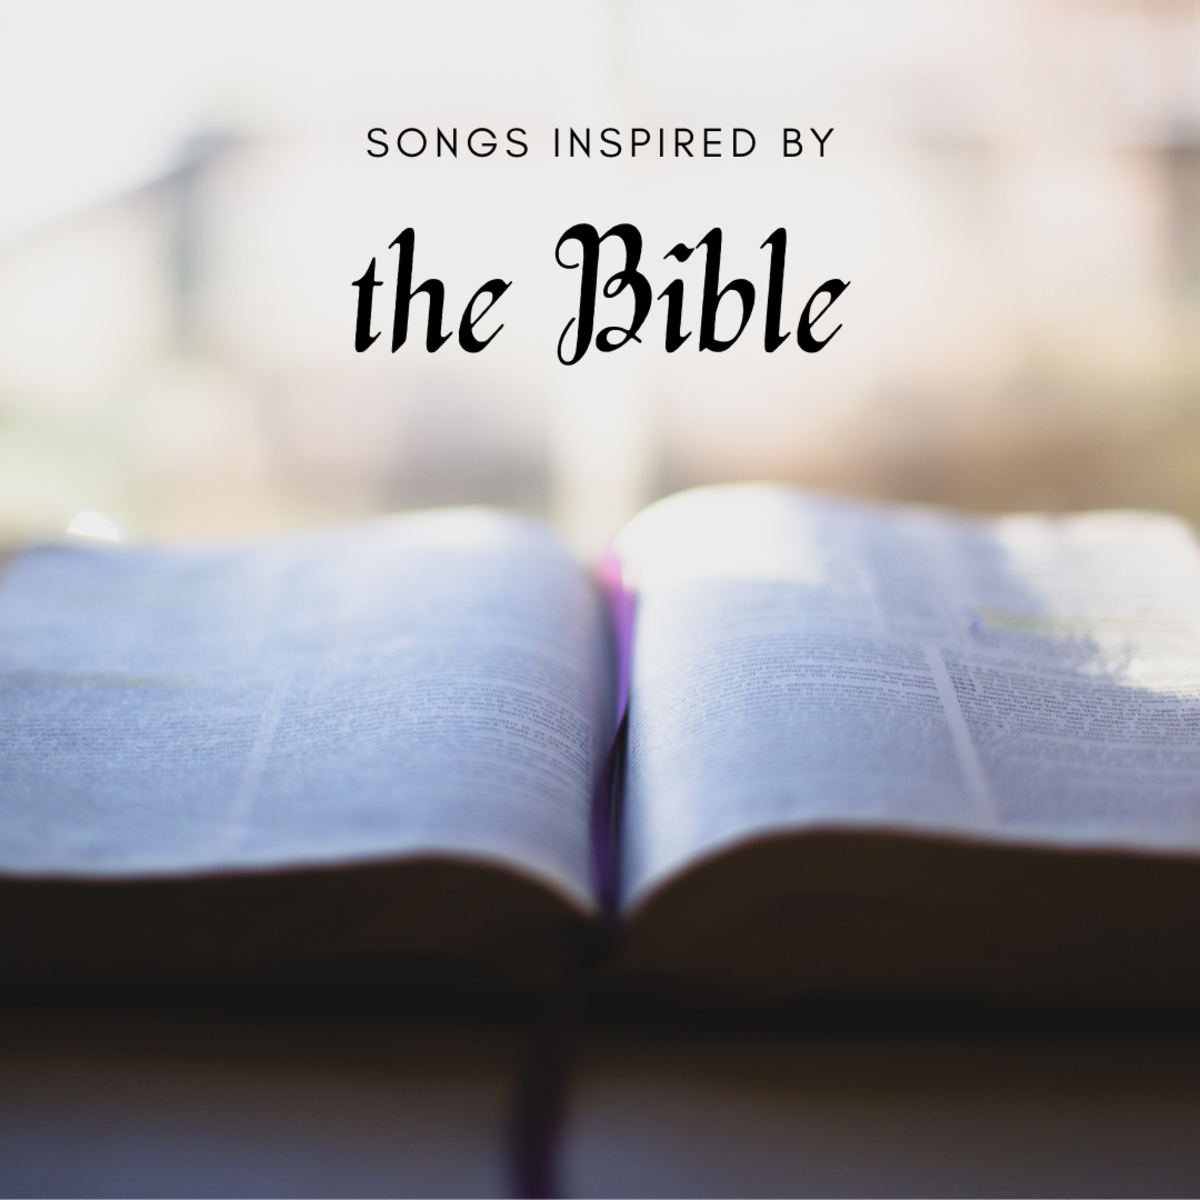 Artists including Bob Dylan, Leonard Cohen, Metallica, and the Pixies have been inspired to write songs based on the Bible. 